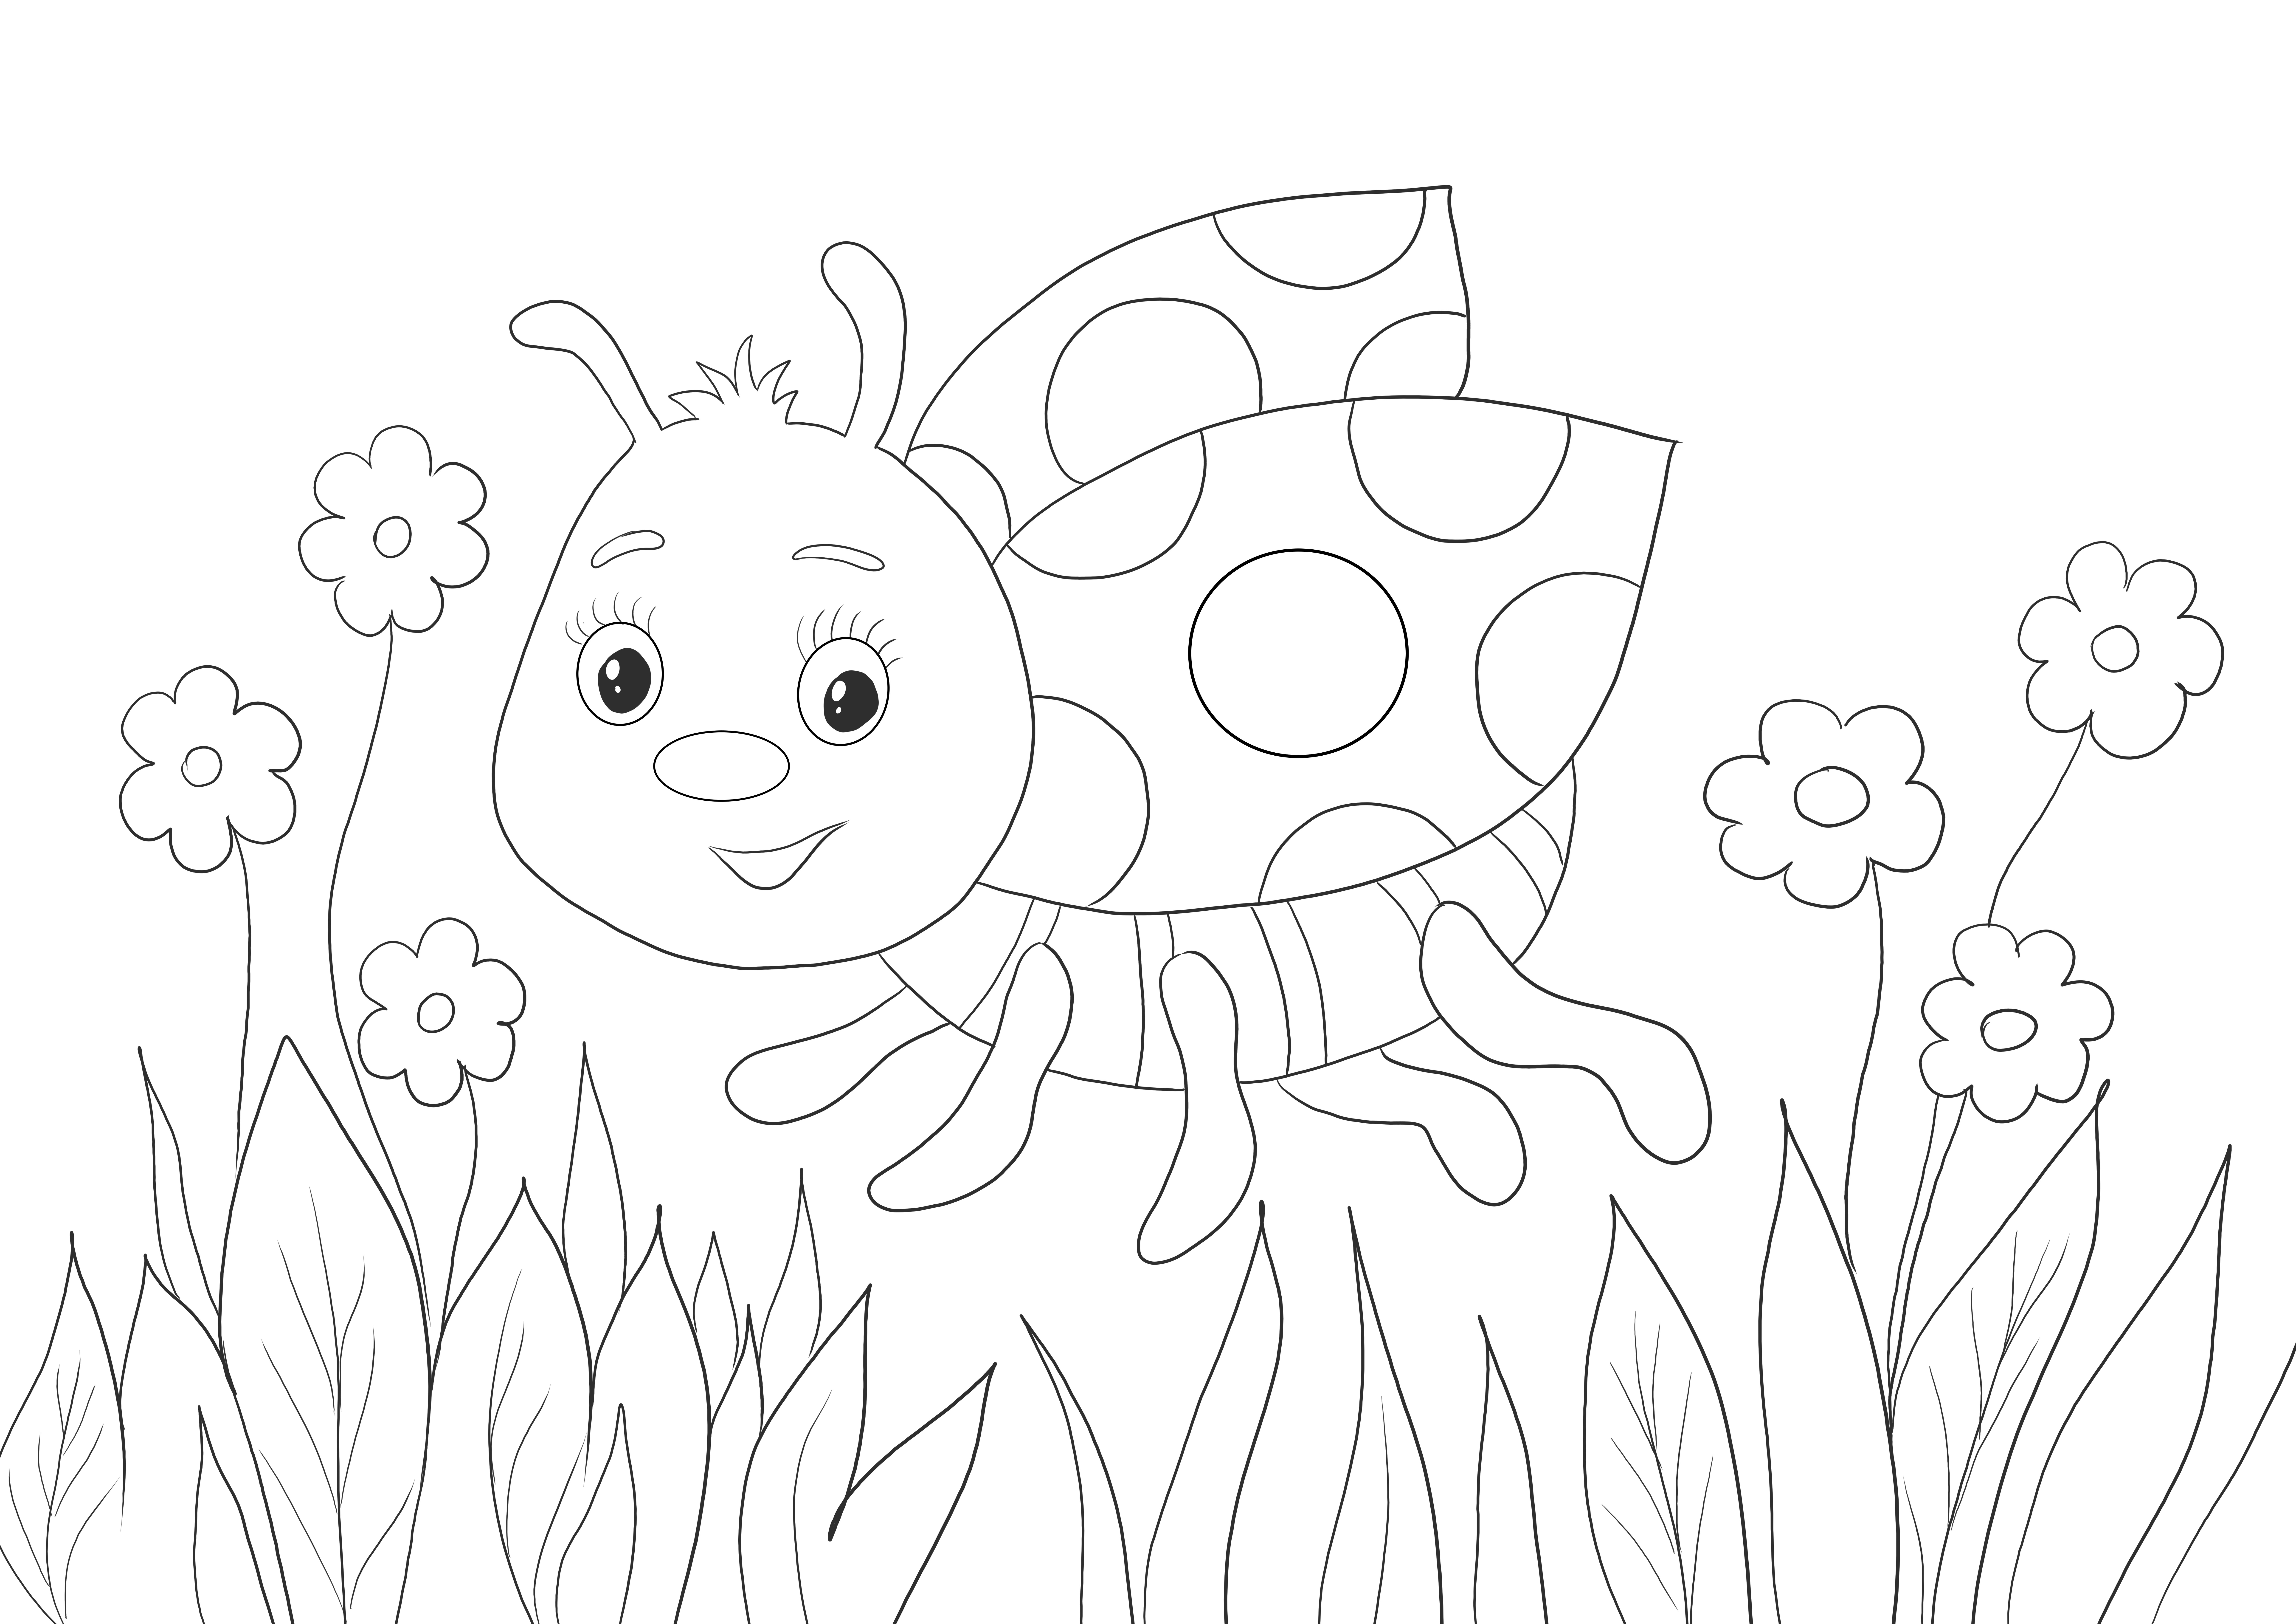 Smiling Lady Bug to color- free printing or saving for later image